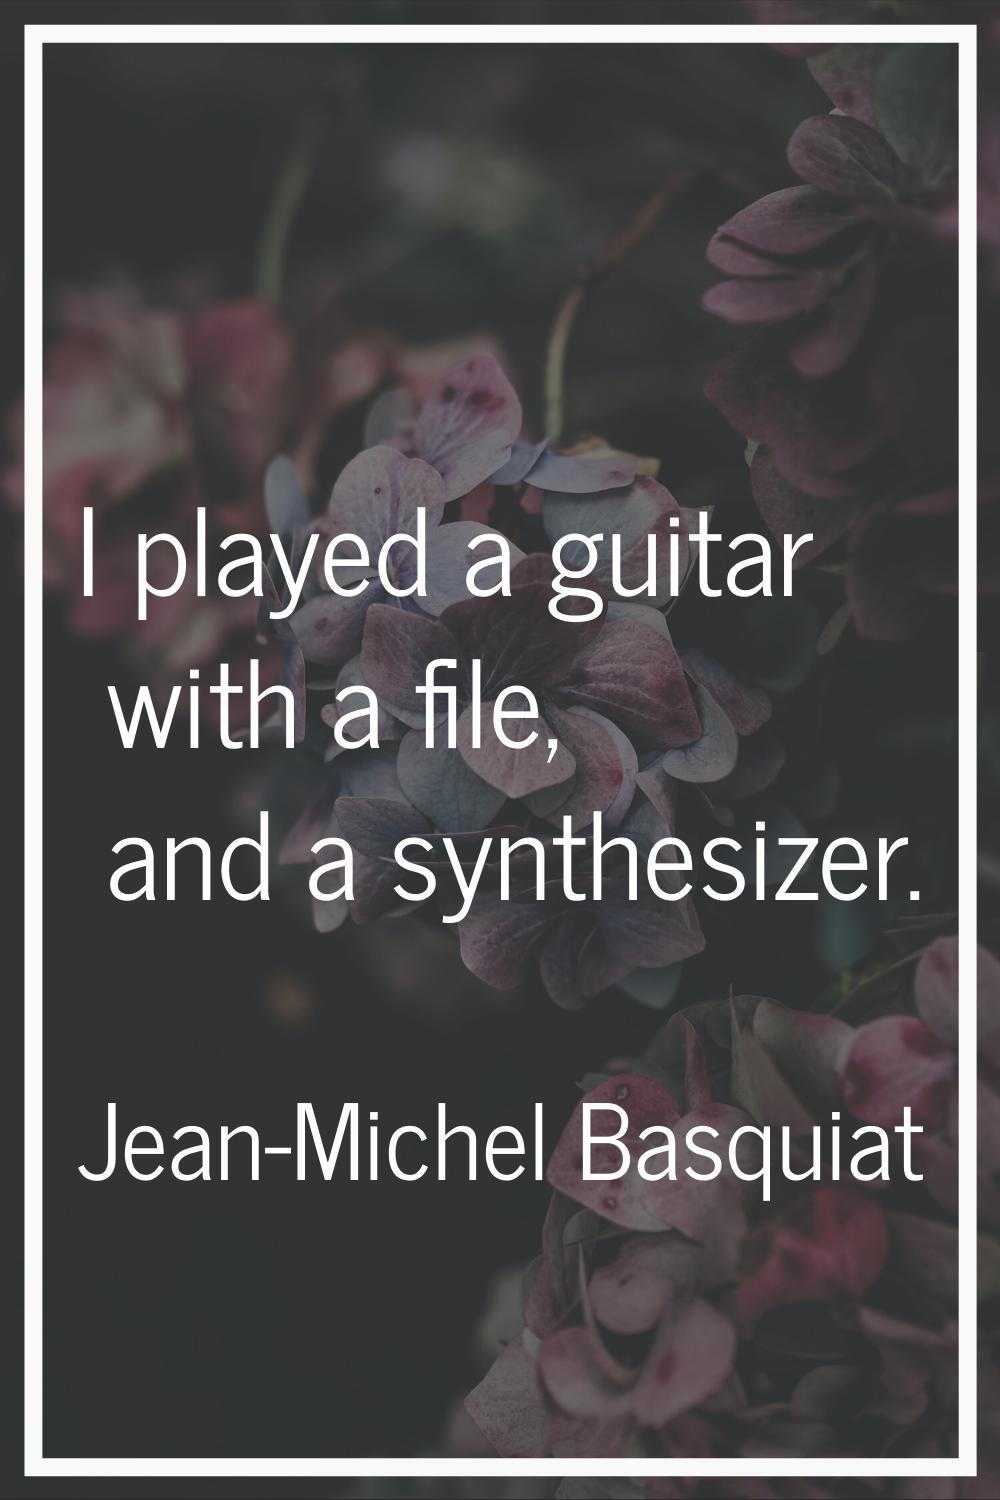 I played a guitar with a file, and a synthesizer.